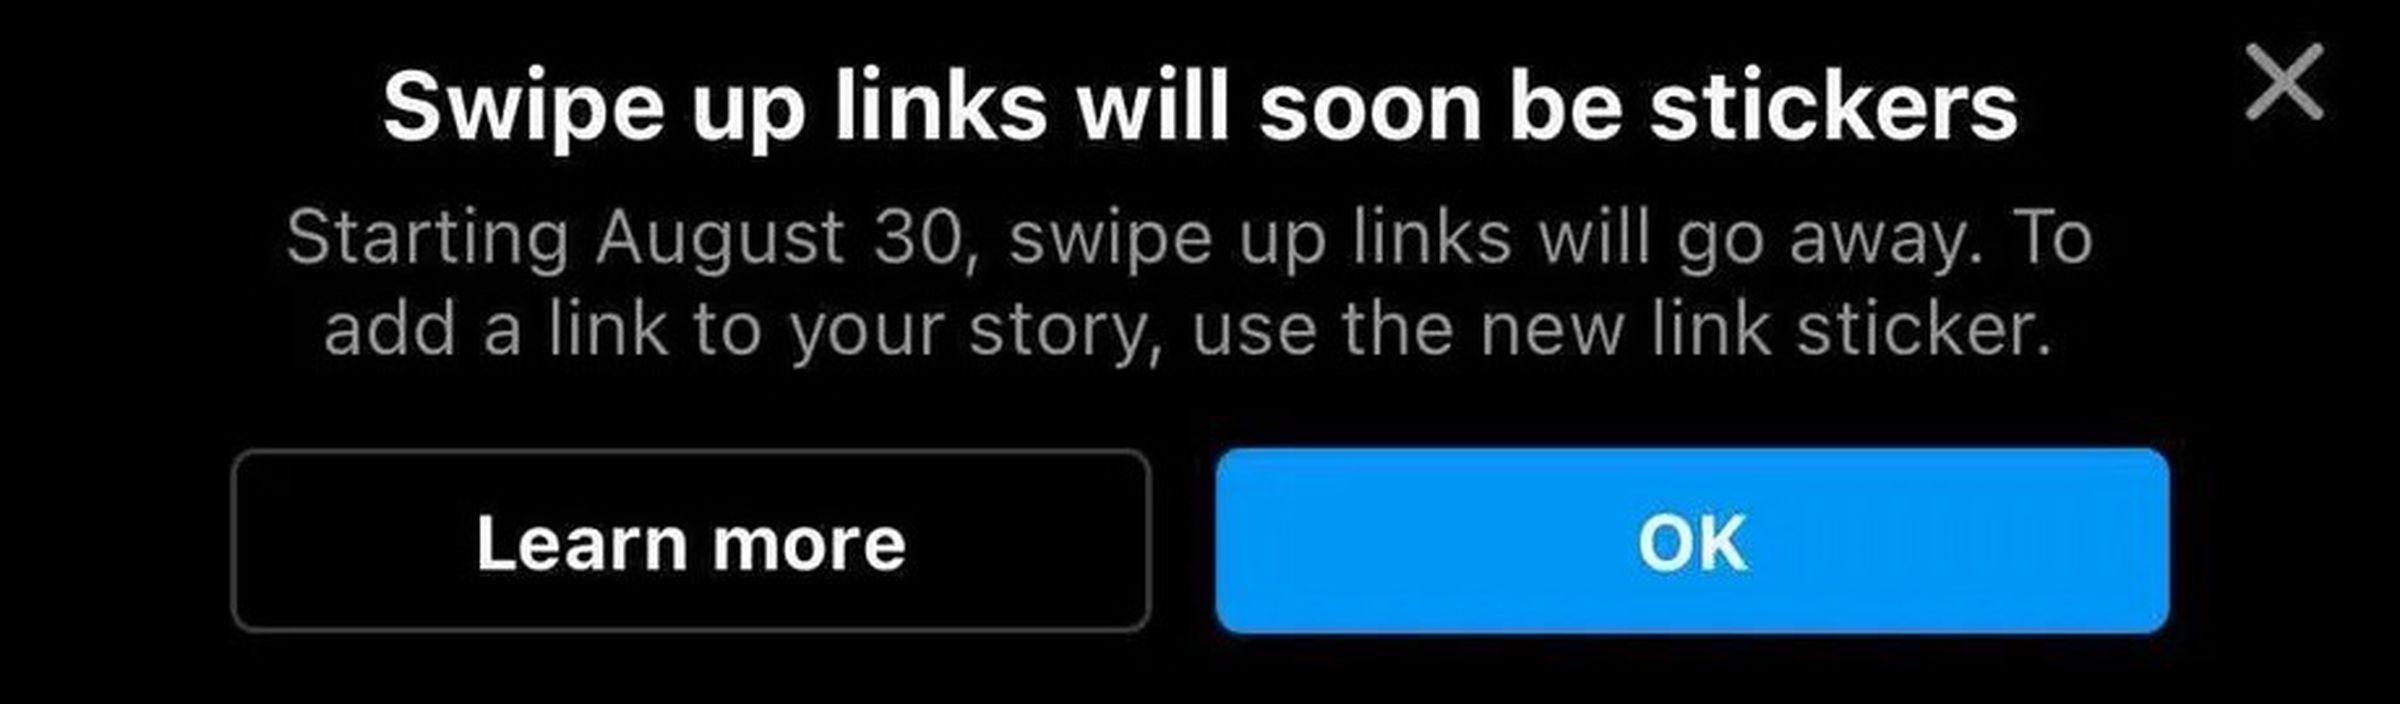 Instagram’s message about the change to swipe up links.